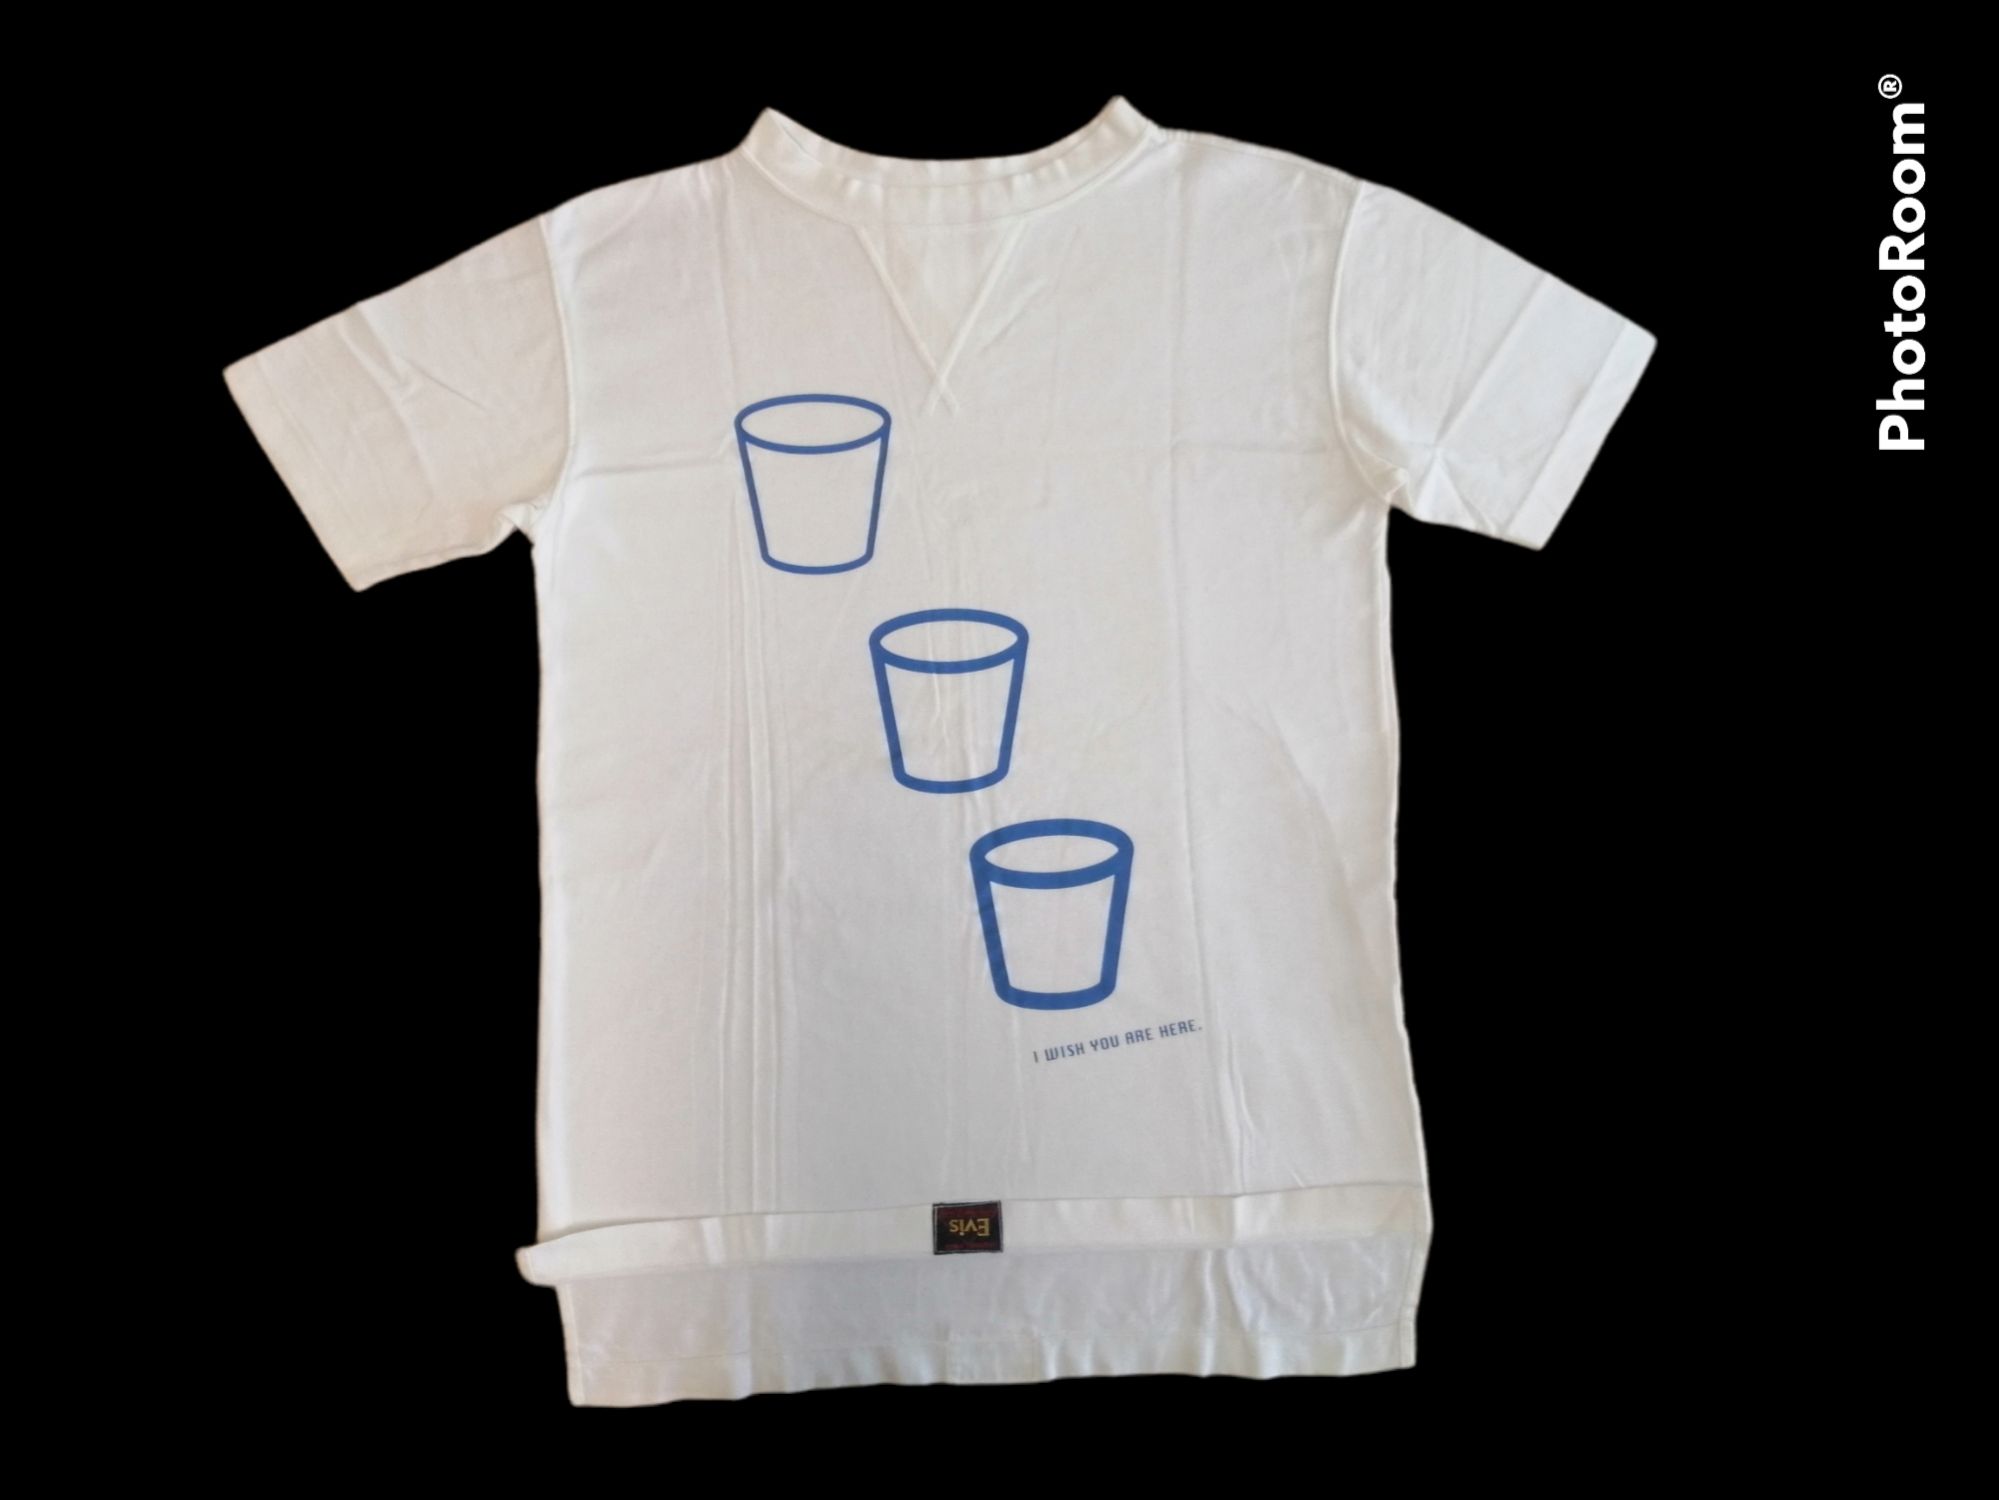 Awesome calpis water X evis evisu collaboration t shirt - 1